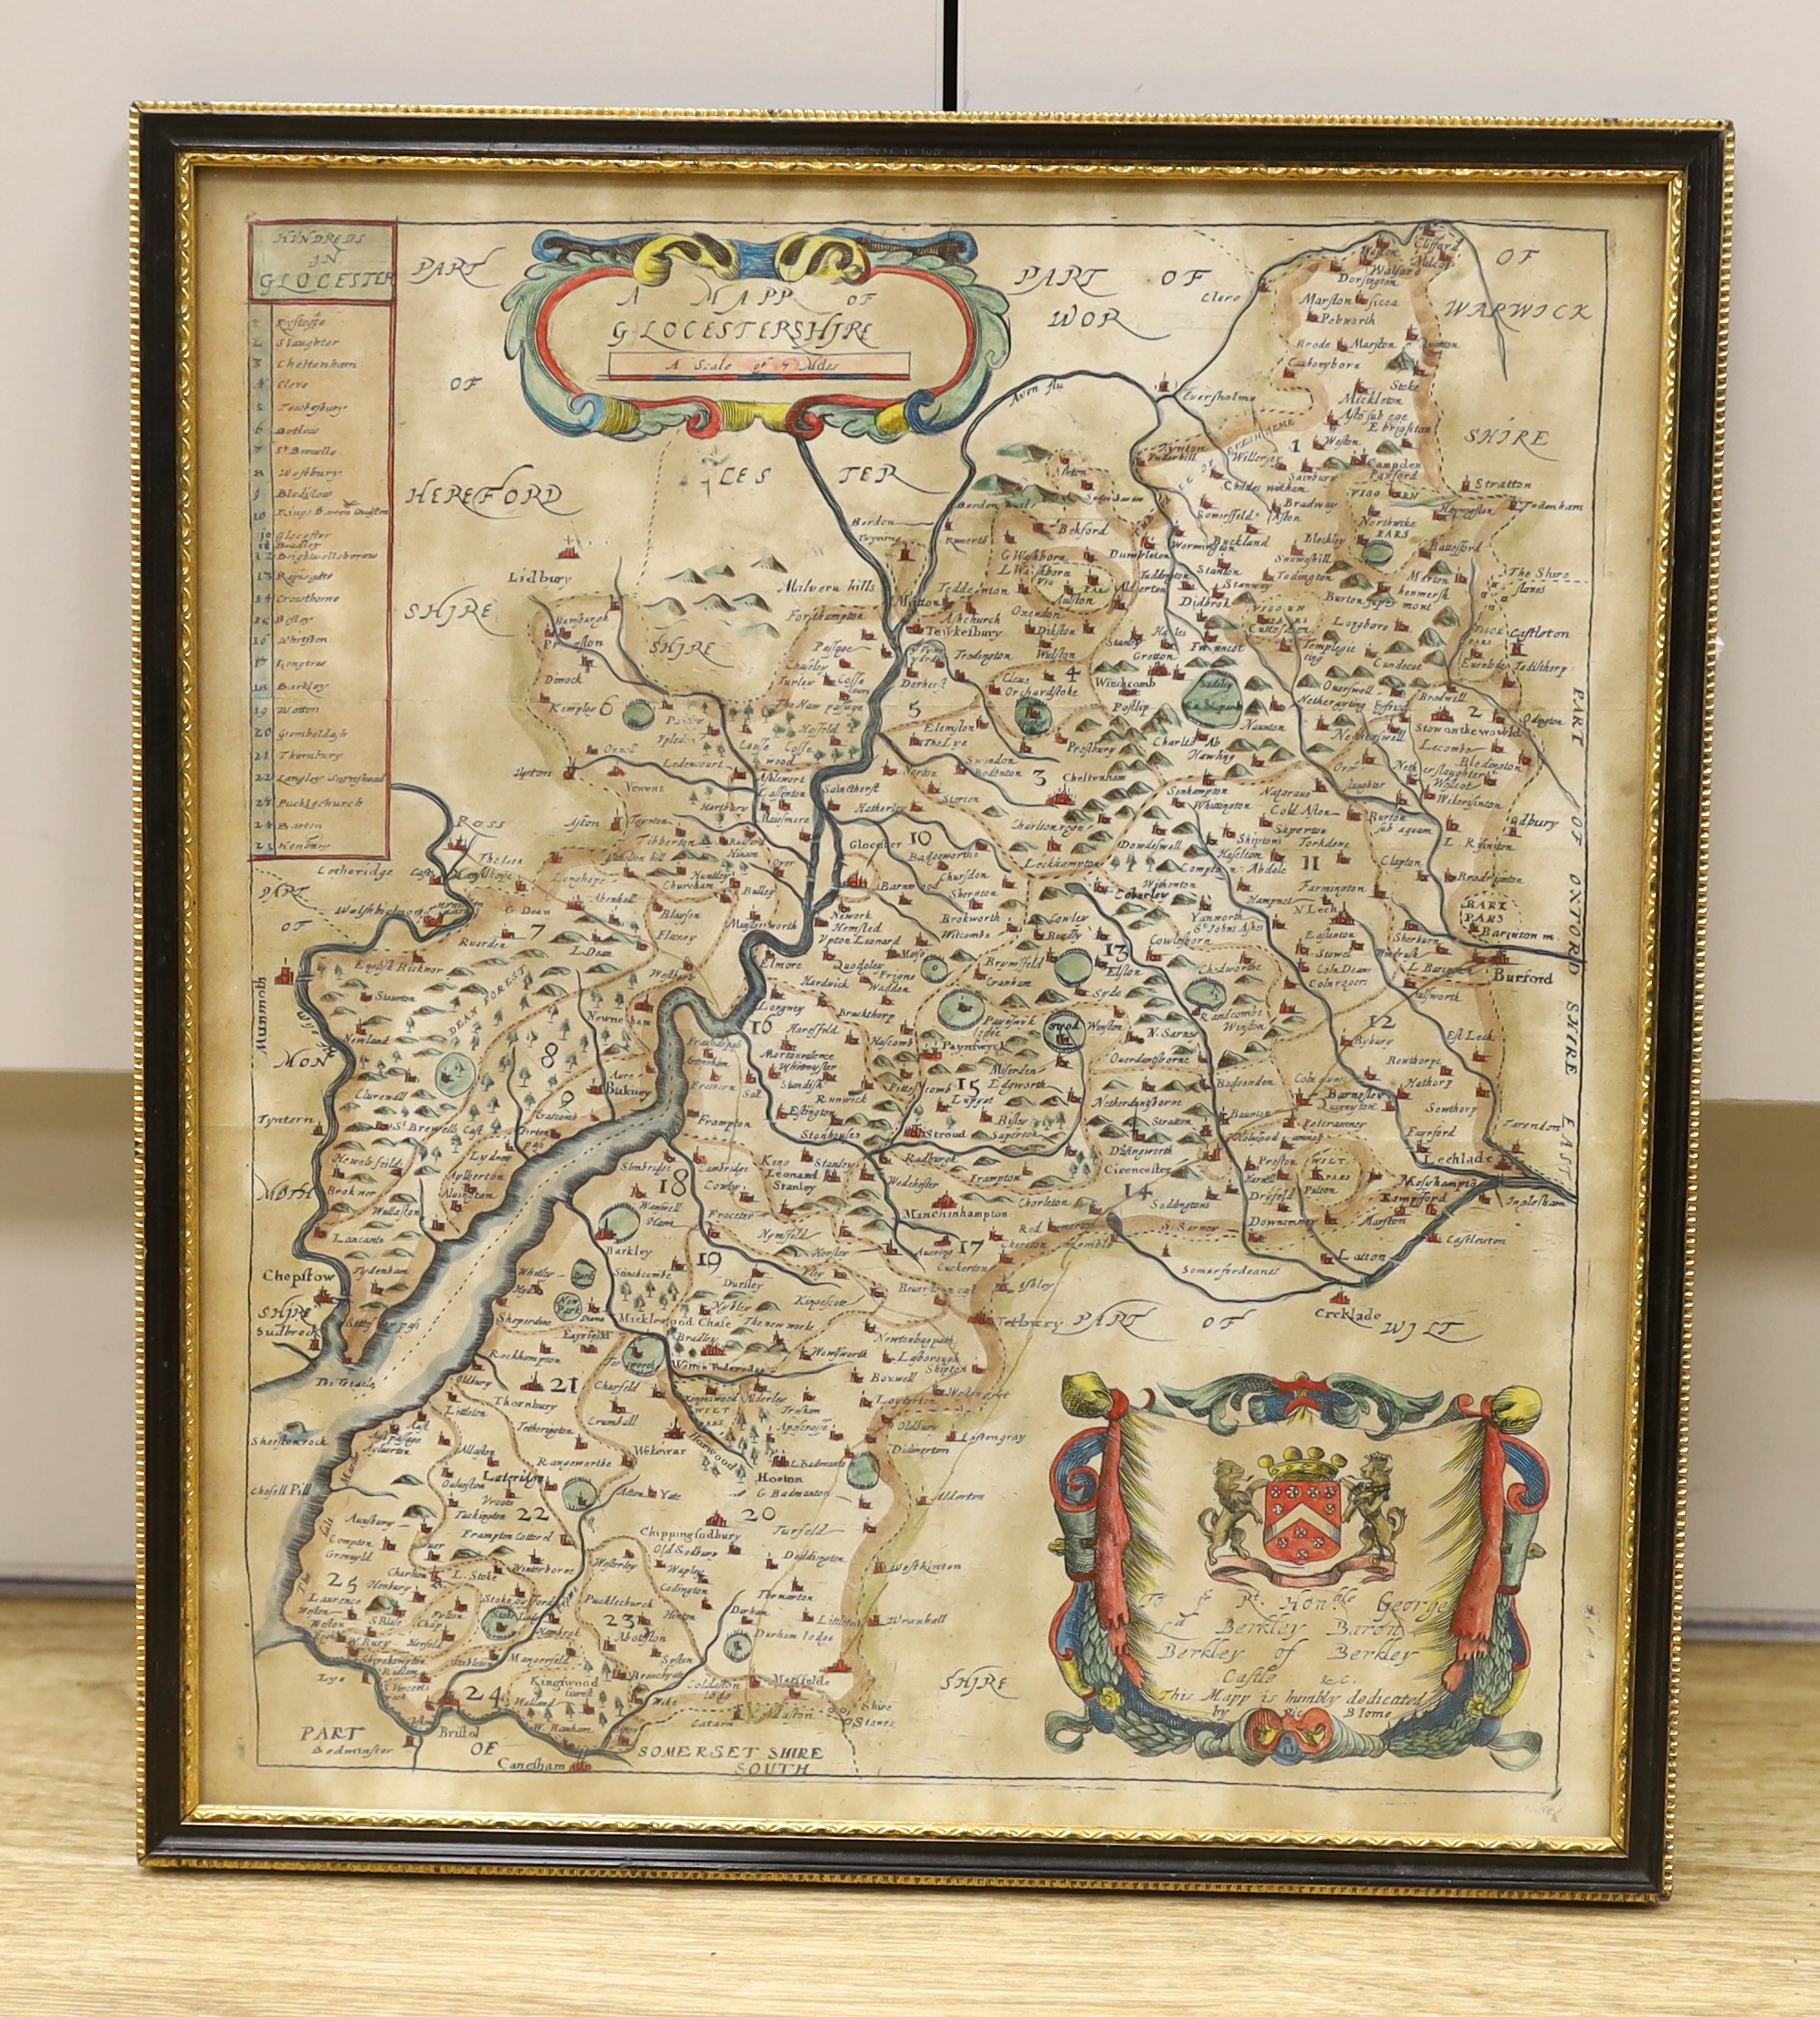 Richard Blome (1635-1705), hand coloured map of Gloucestershire, 34 x 29cm